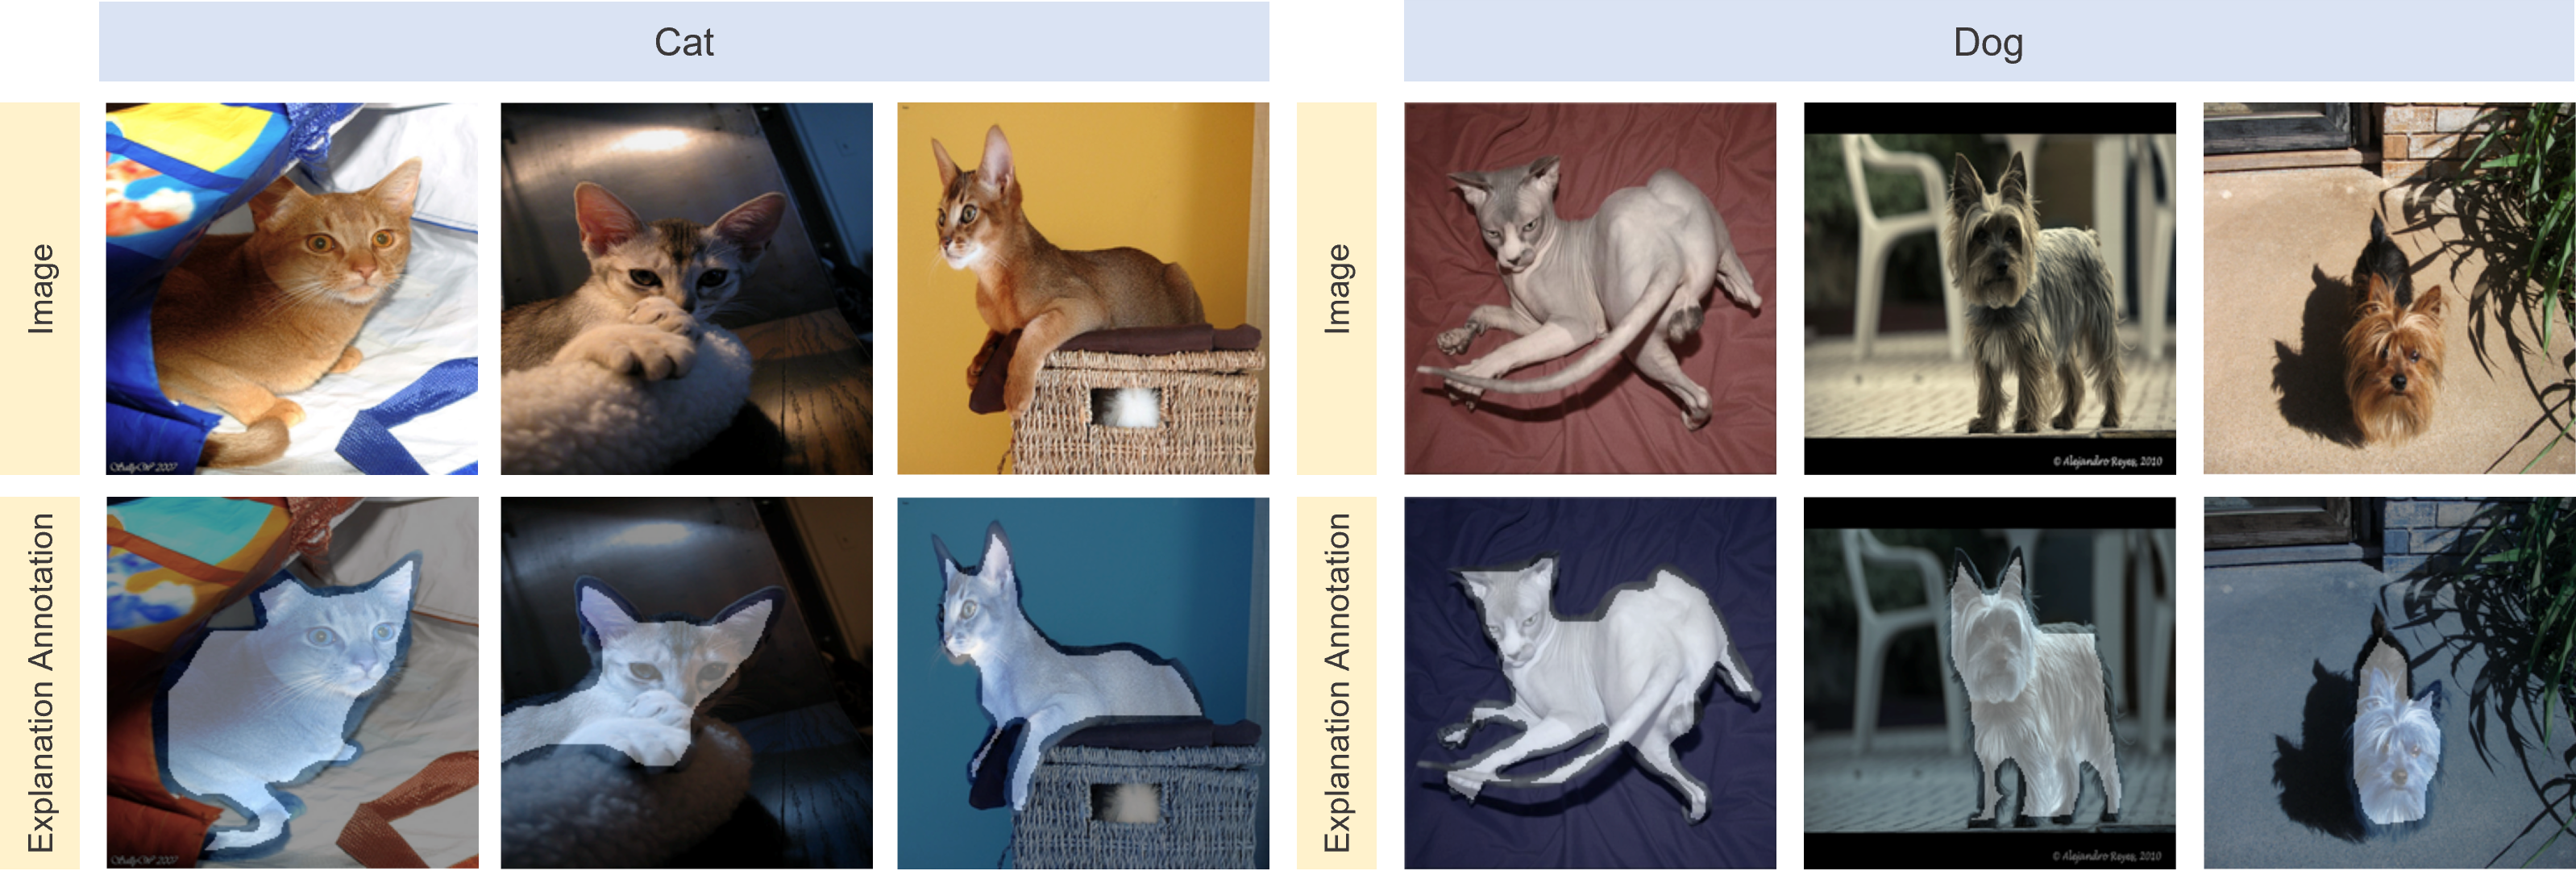 Cats&Dogs_Classification